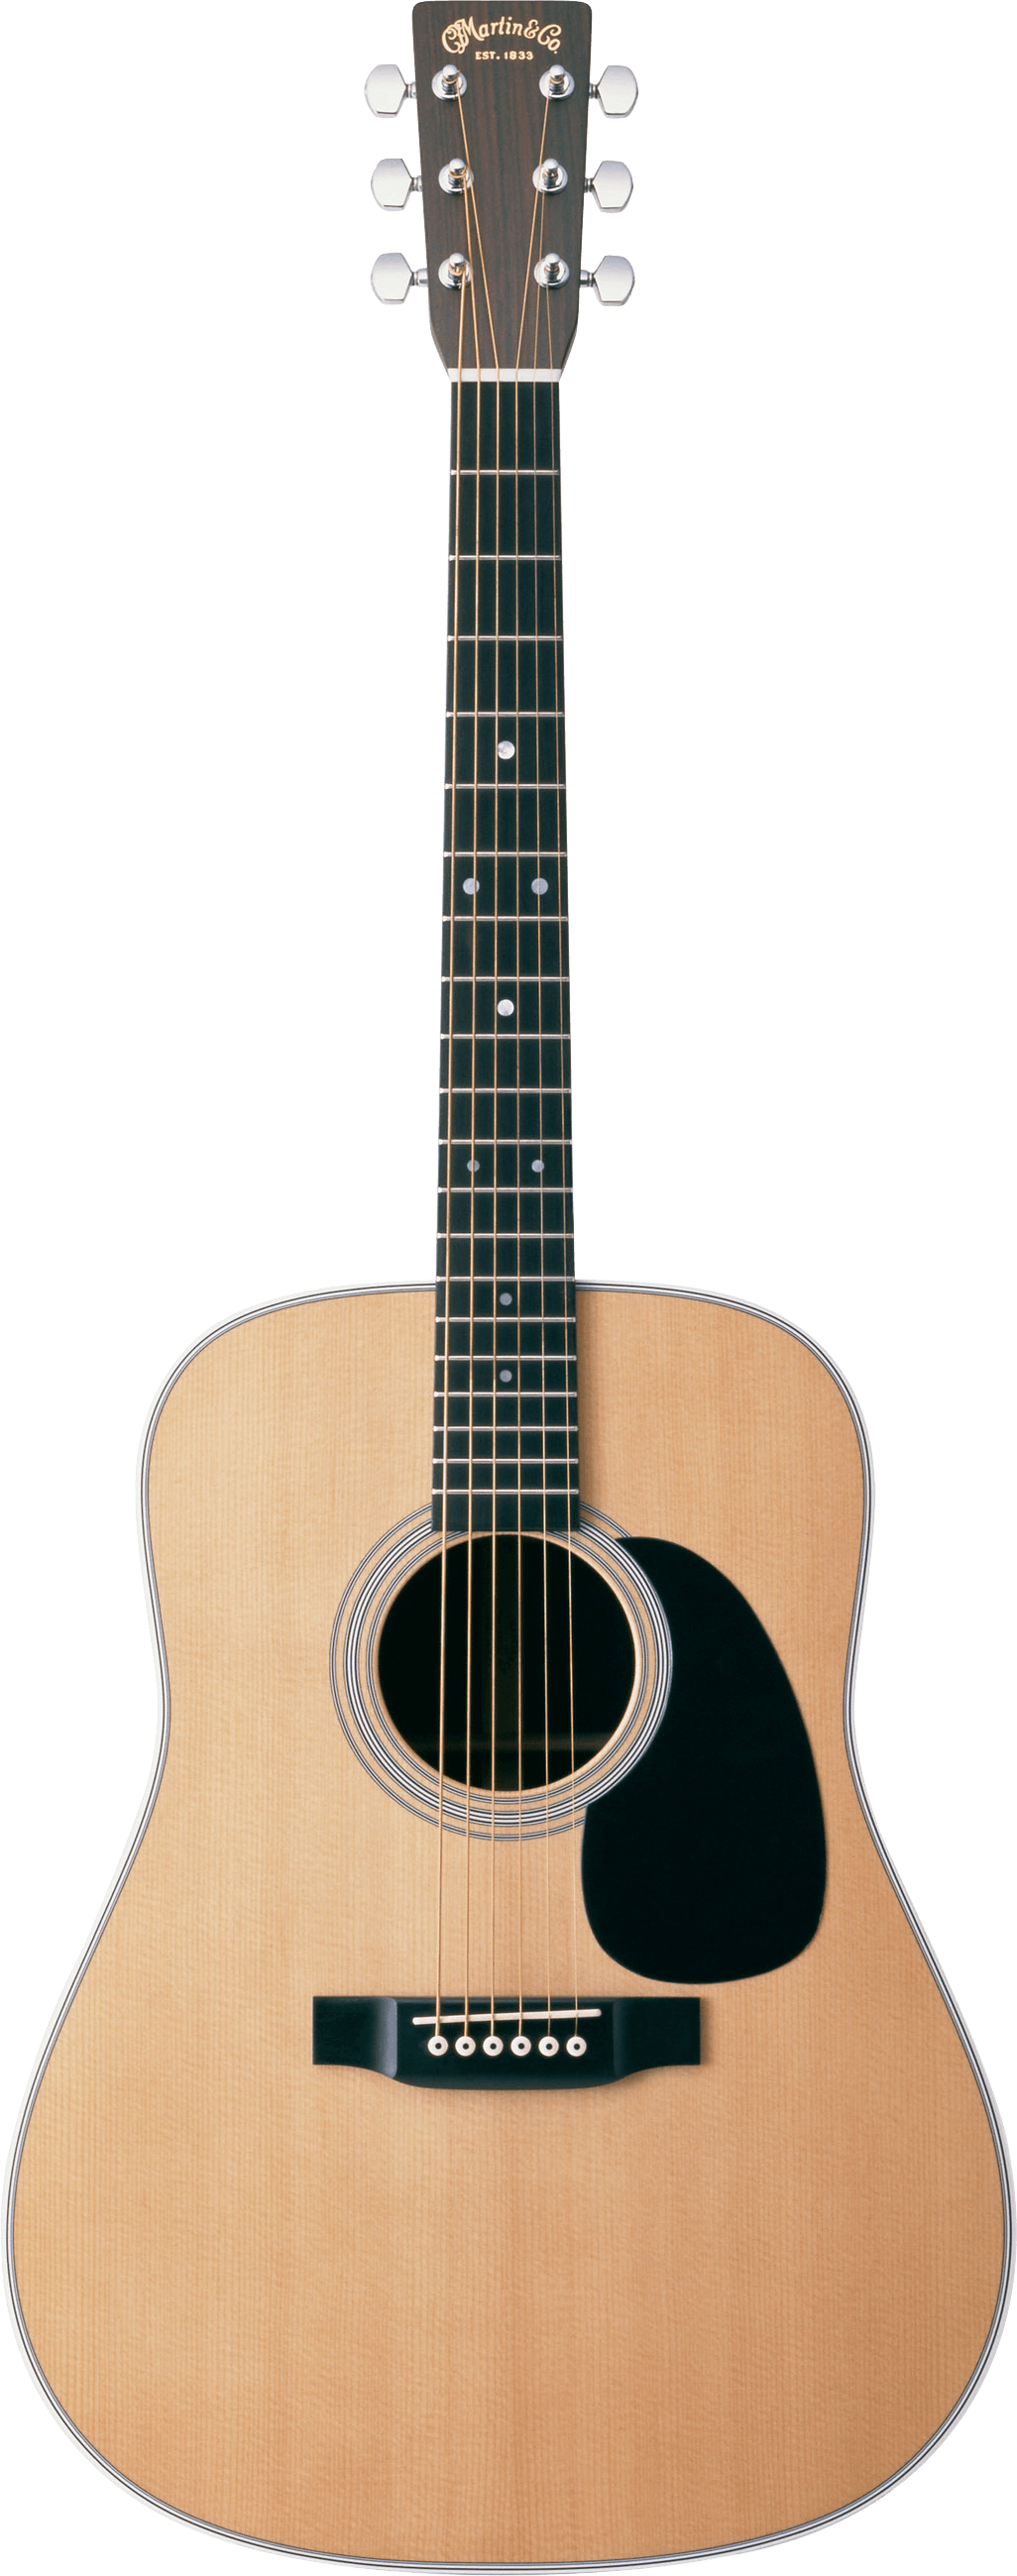 Acoustic Classic Guitar Png Image PNG Image